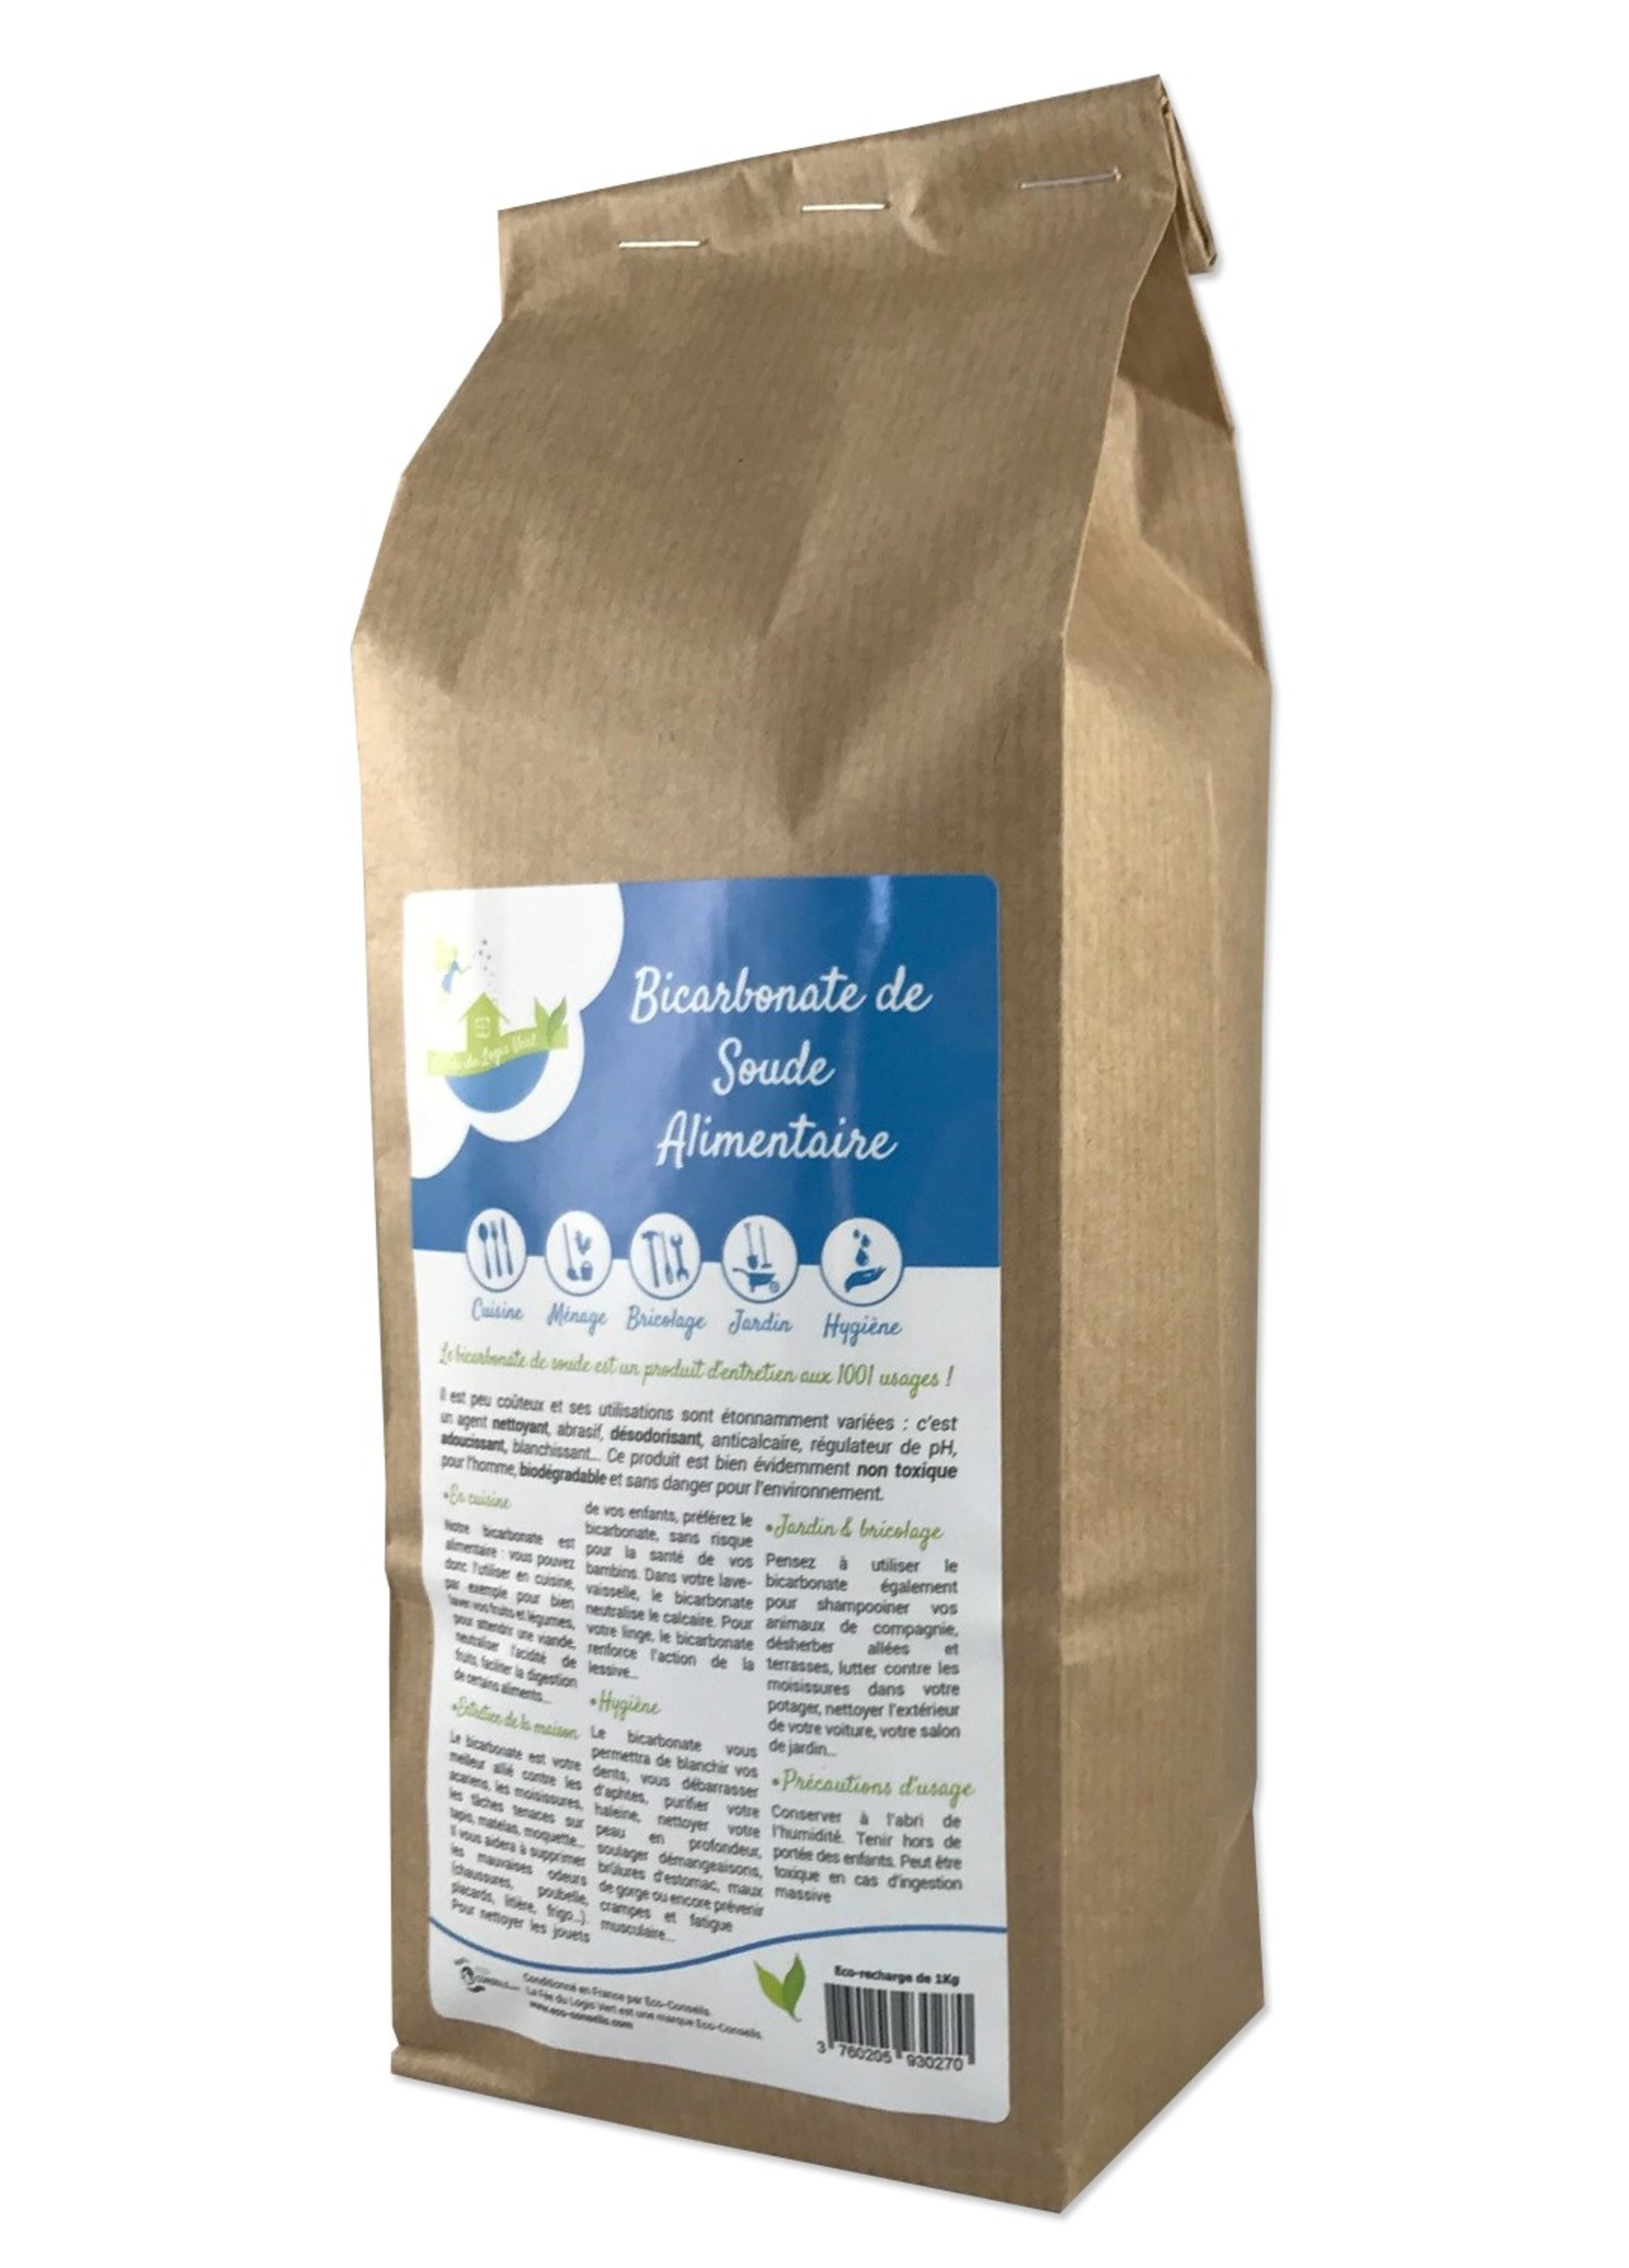 Bicarbonate alimentaire, 500g